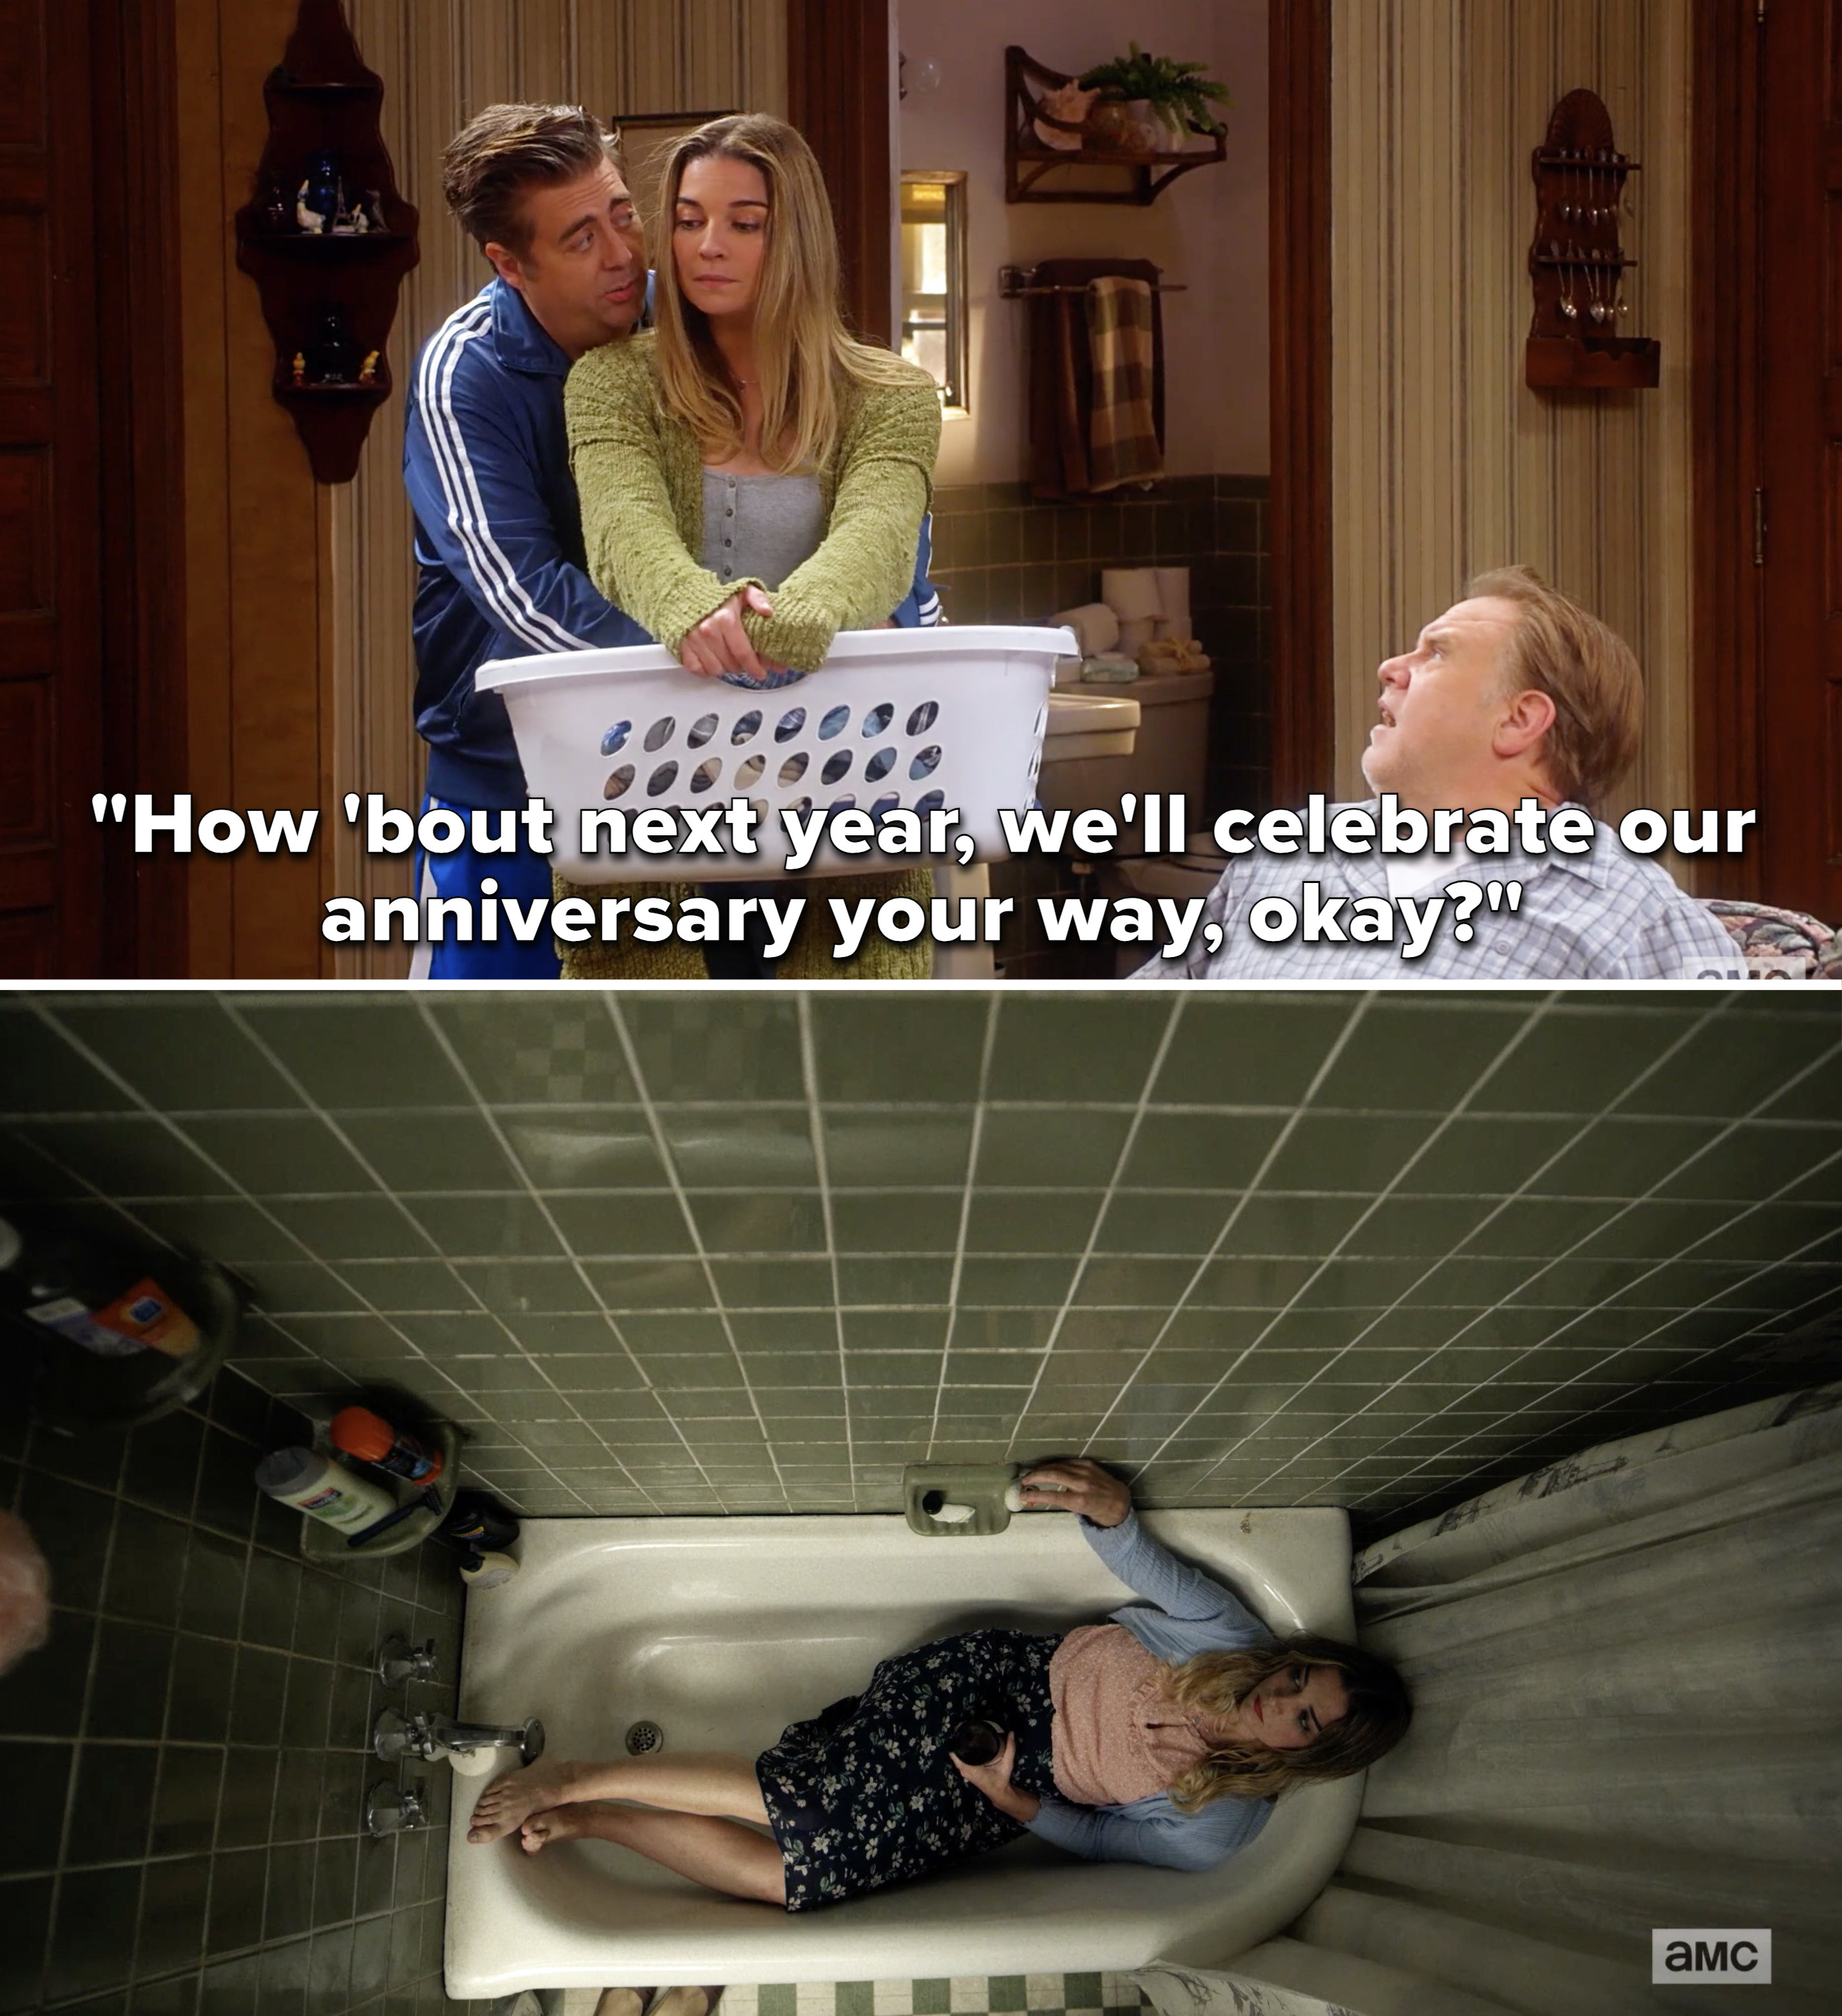 Kevin telling Allison, &quot;How &#x27;bout next year, we&#x27;ll celebrate our anniversary your way, okay?&quot; and a still of Allison sitting fully clothed in the bathtub